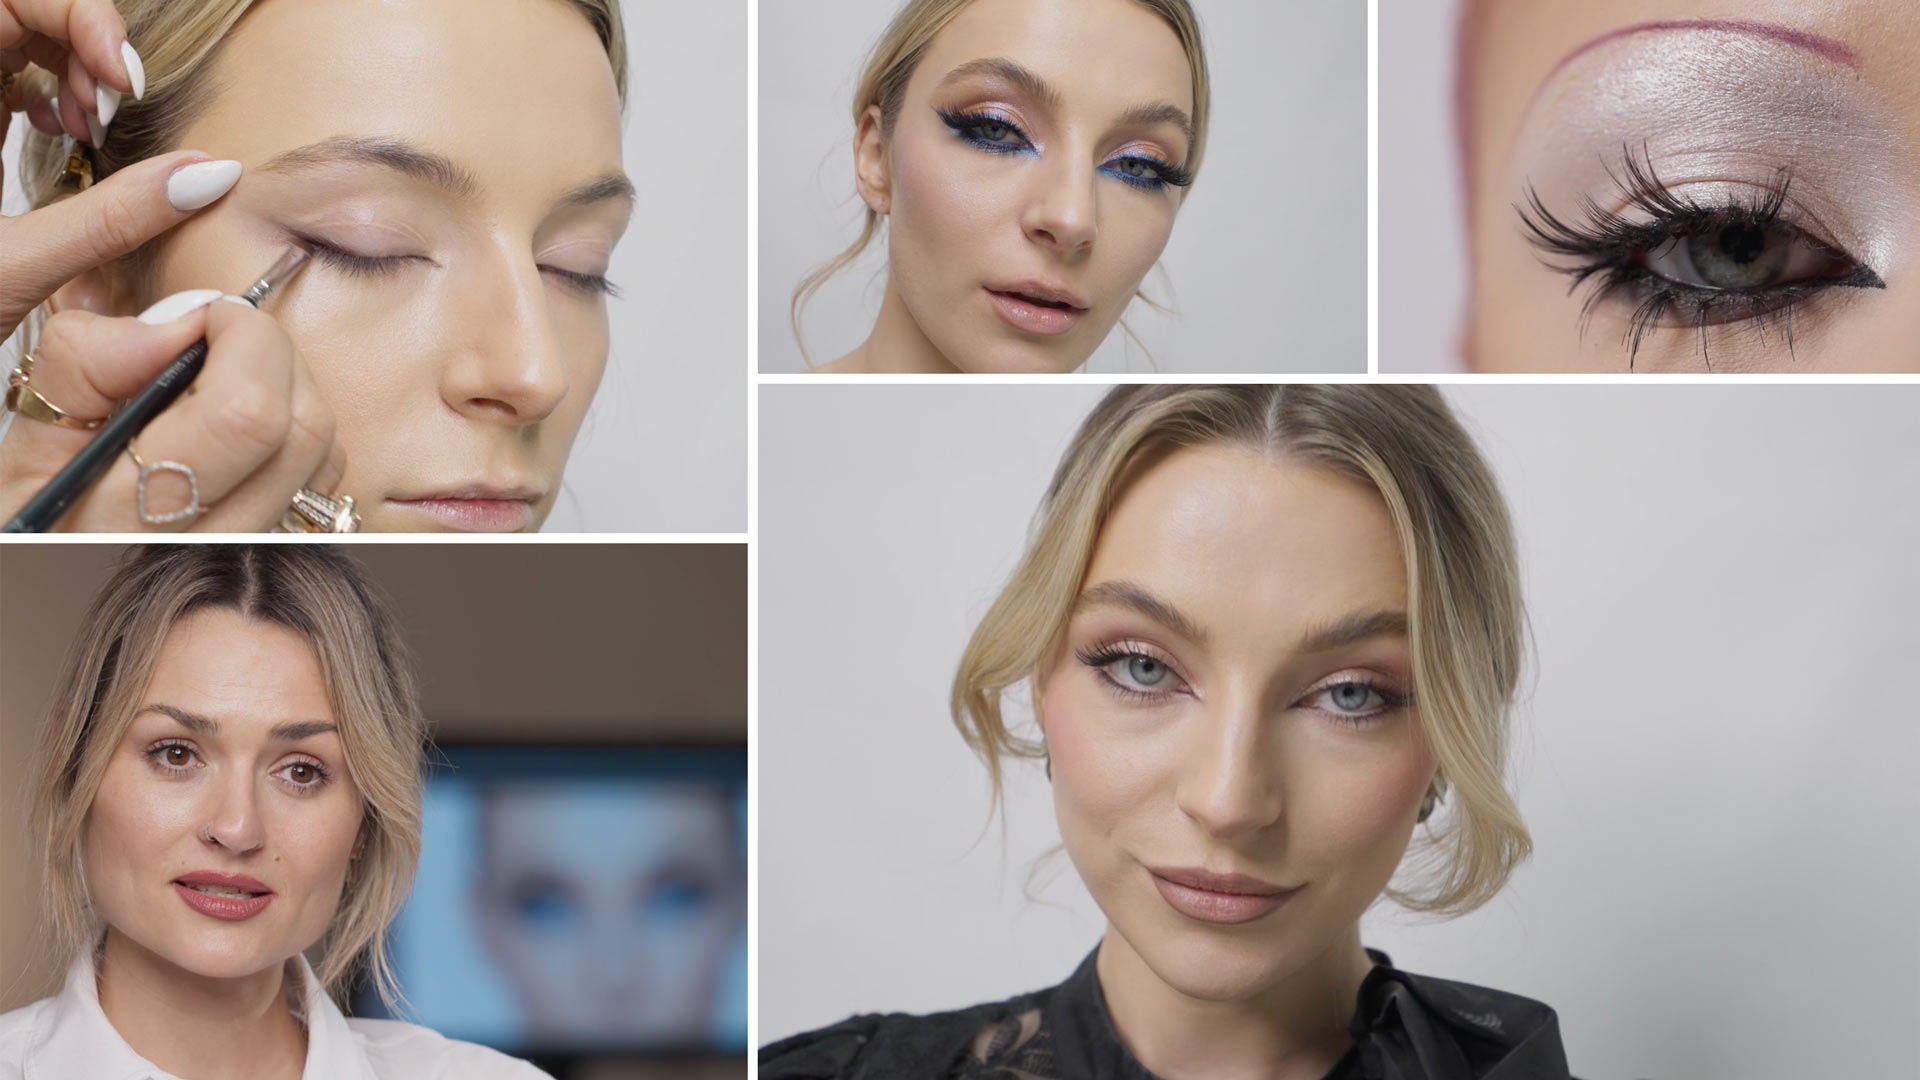 Makeup for Photoshoots vs Occasions